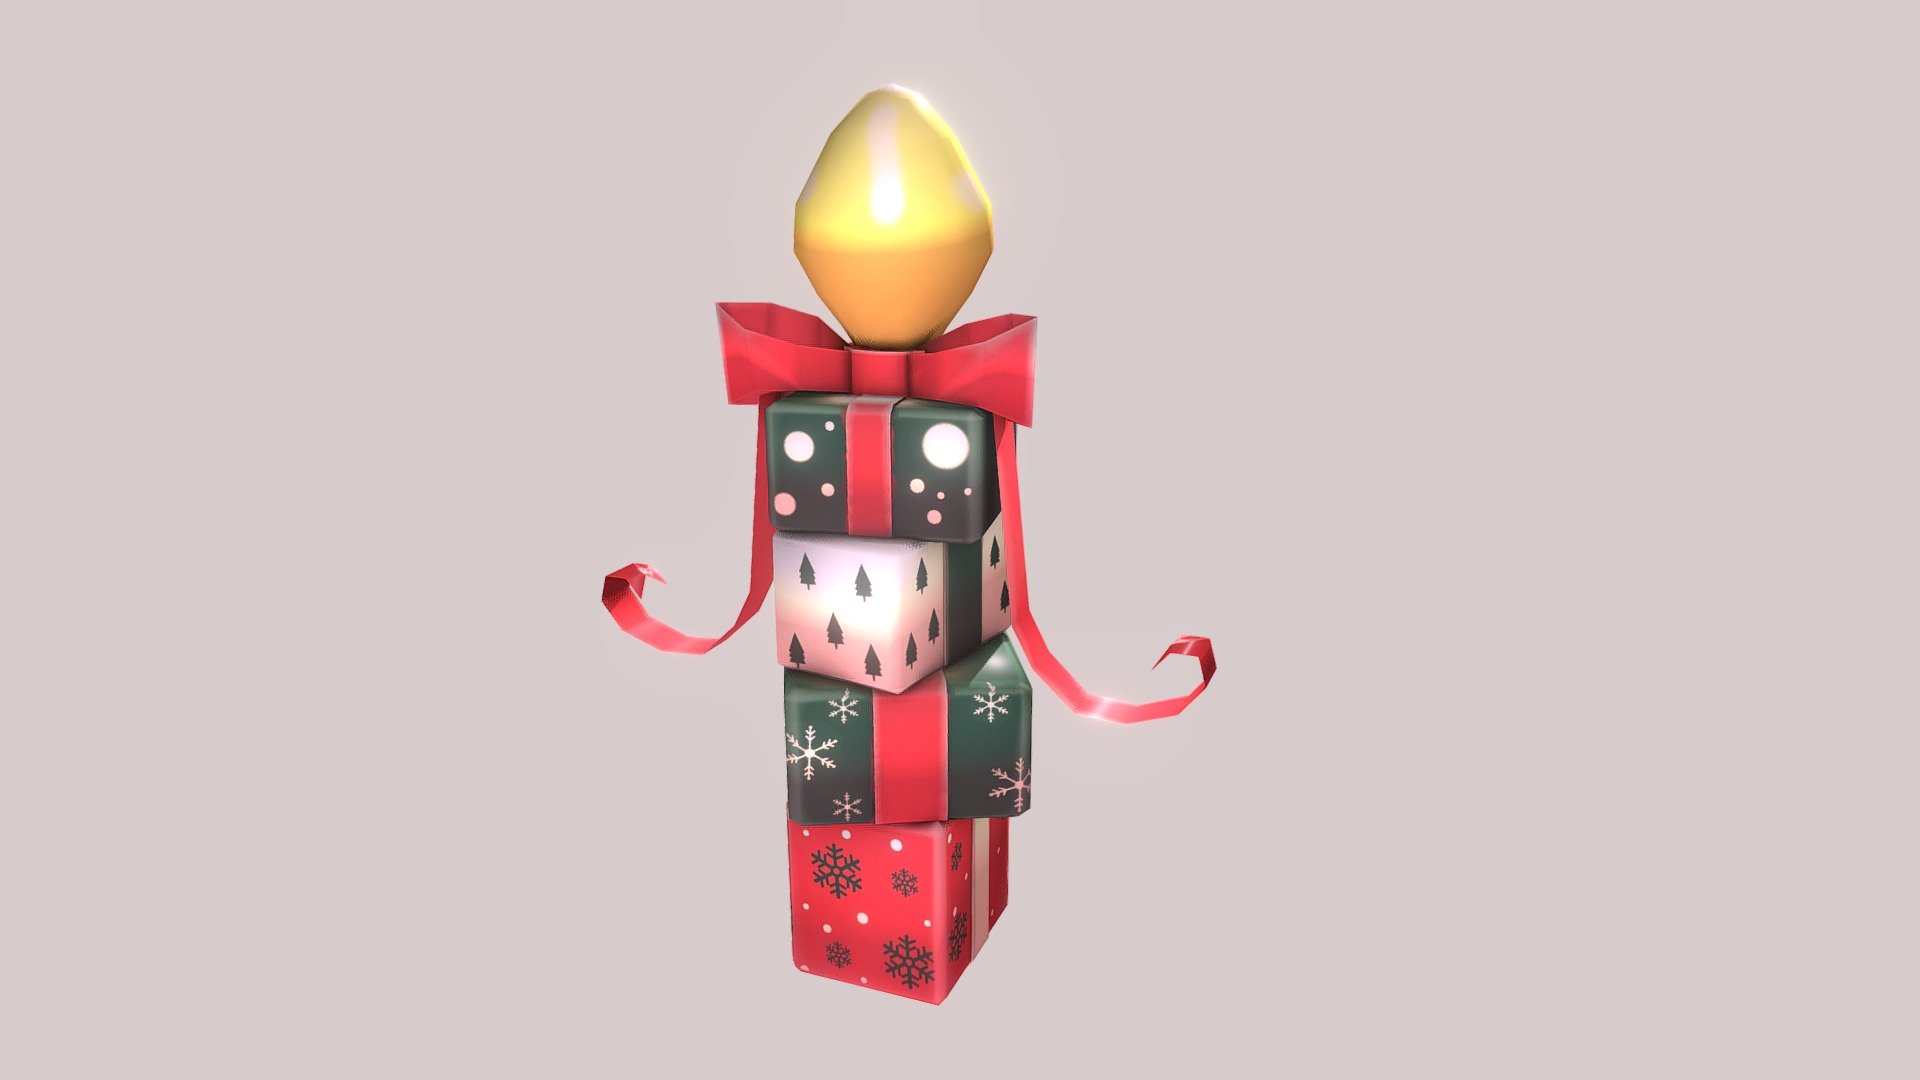 This will be part of a winter asset pack for Unity I am working on. I went for a cartoony hand-painted style. These were inspired by concept art done for me by: Xesavu https://twitter.com/Xesavu - Christmas Present Lamp - 3D model by Cookie (@cookiepop) 3d model